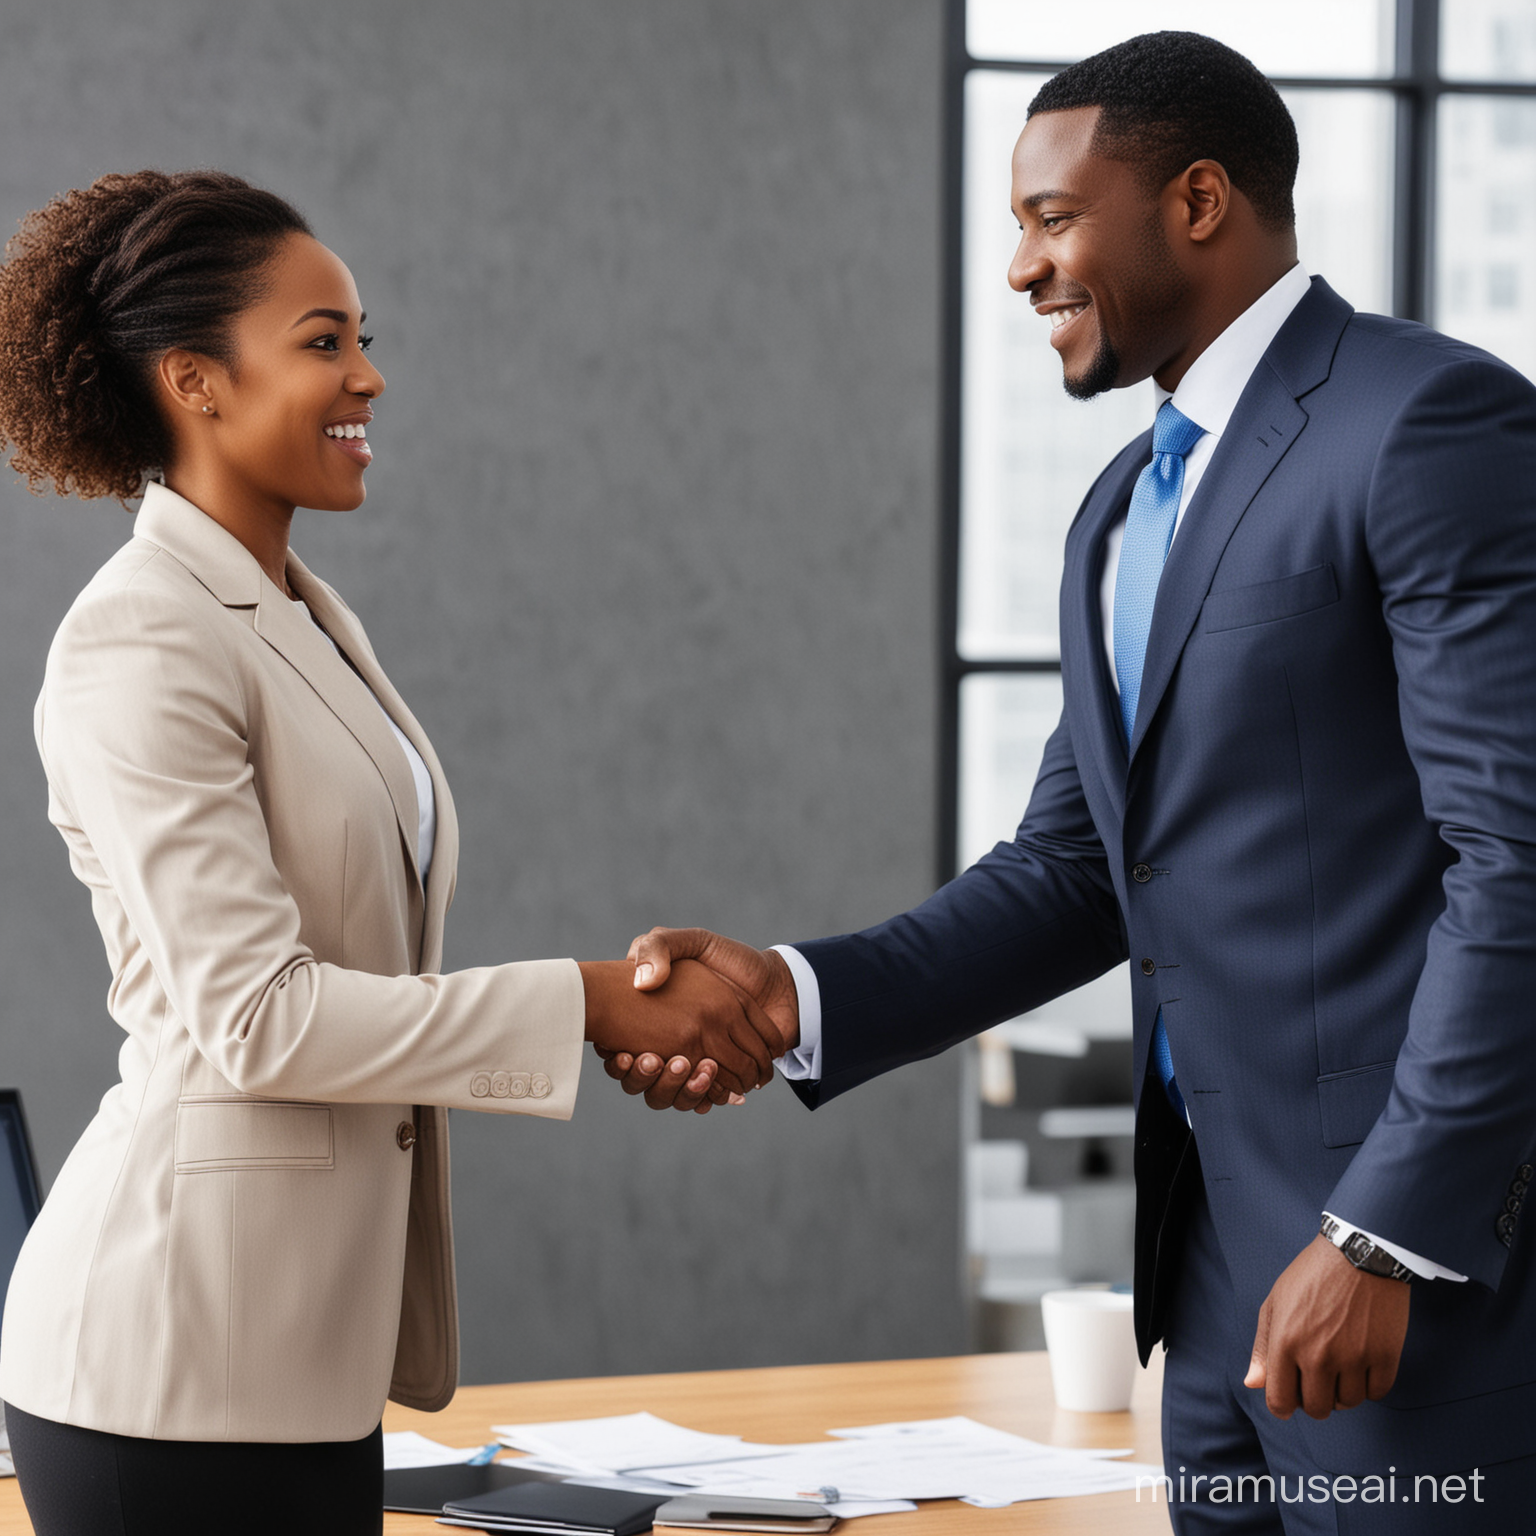 A black american male corporate executive and female black american corporate executive shaking hands in an office environment